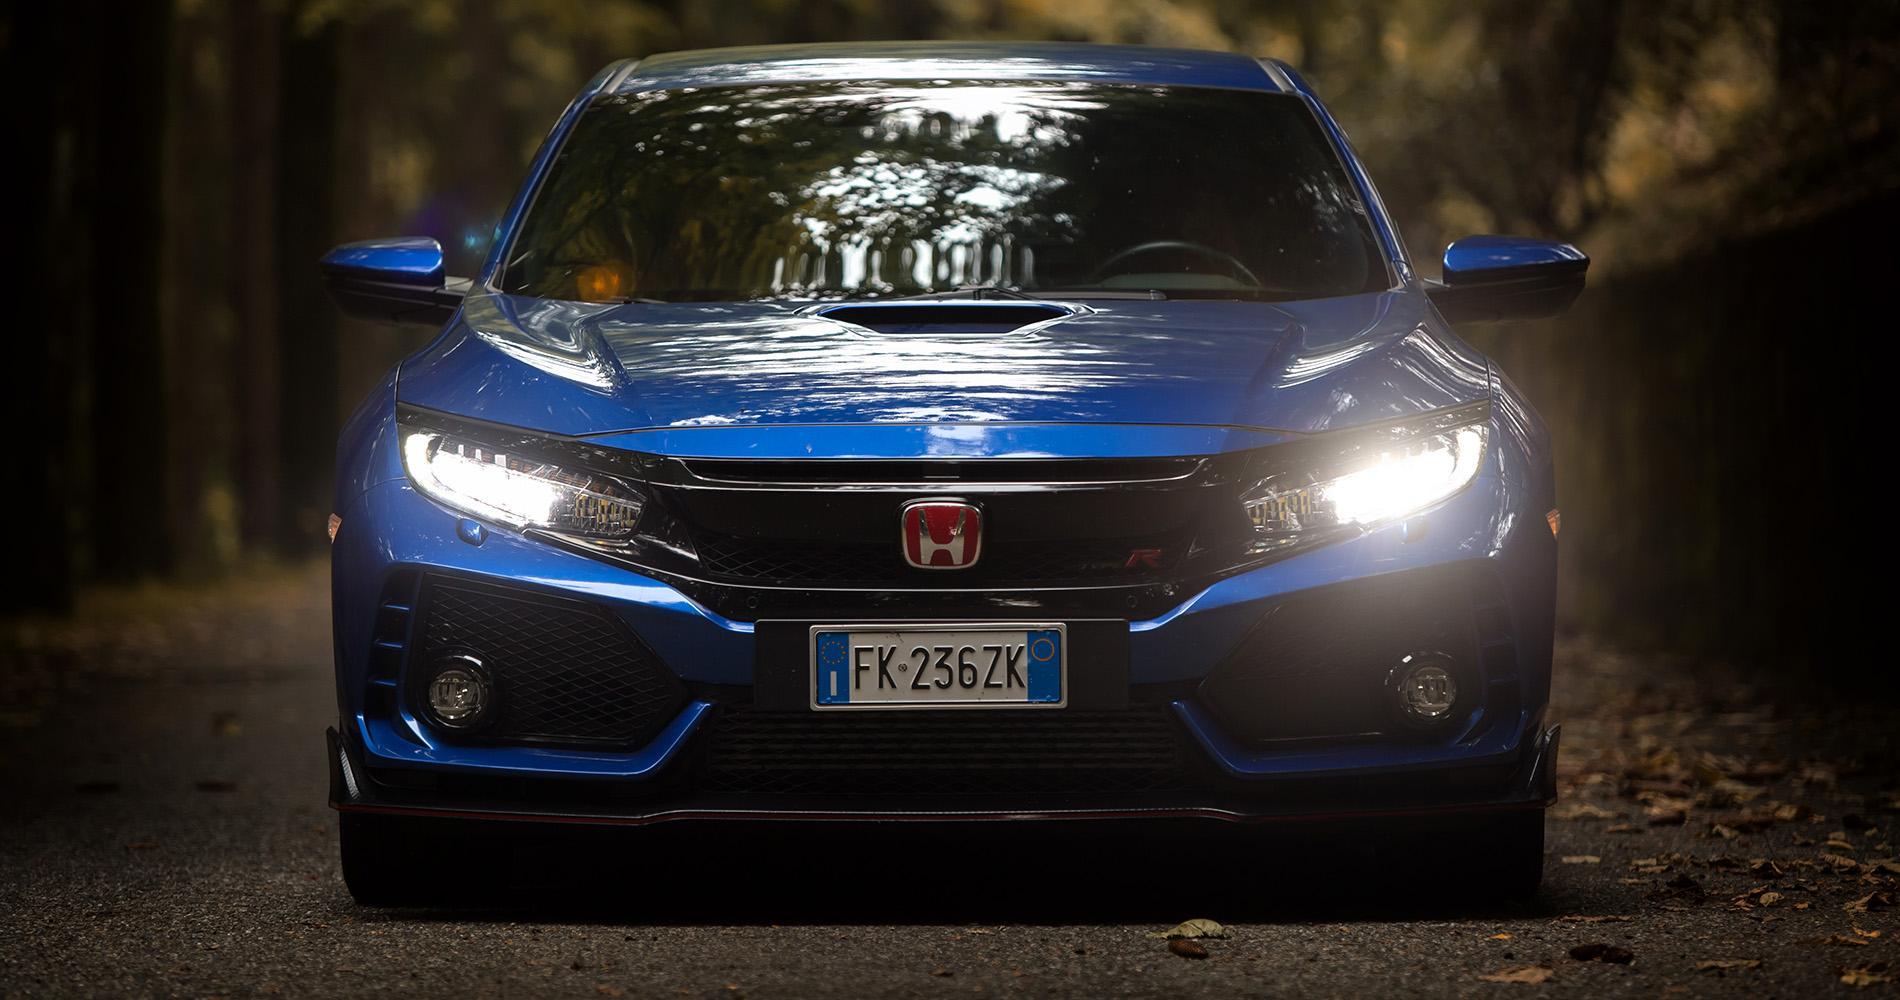 Honda Civic Type R frontale luci